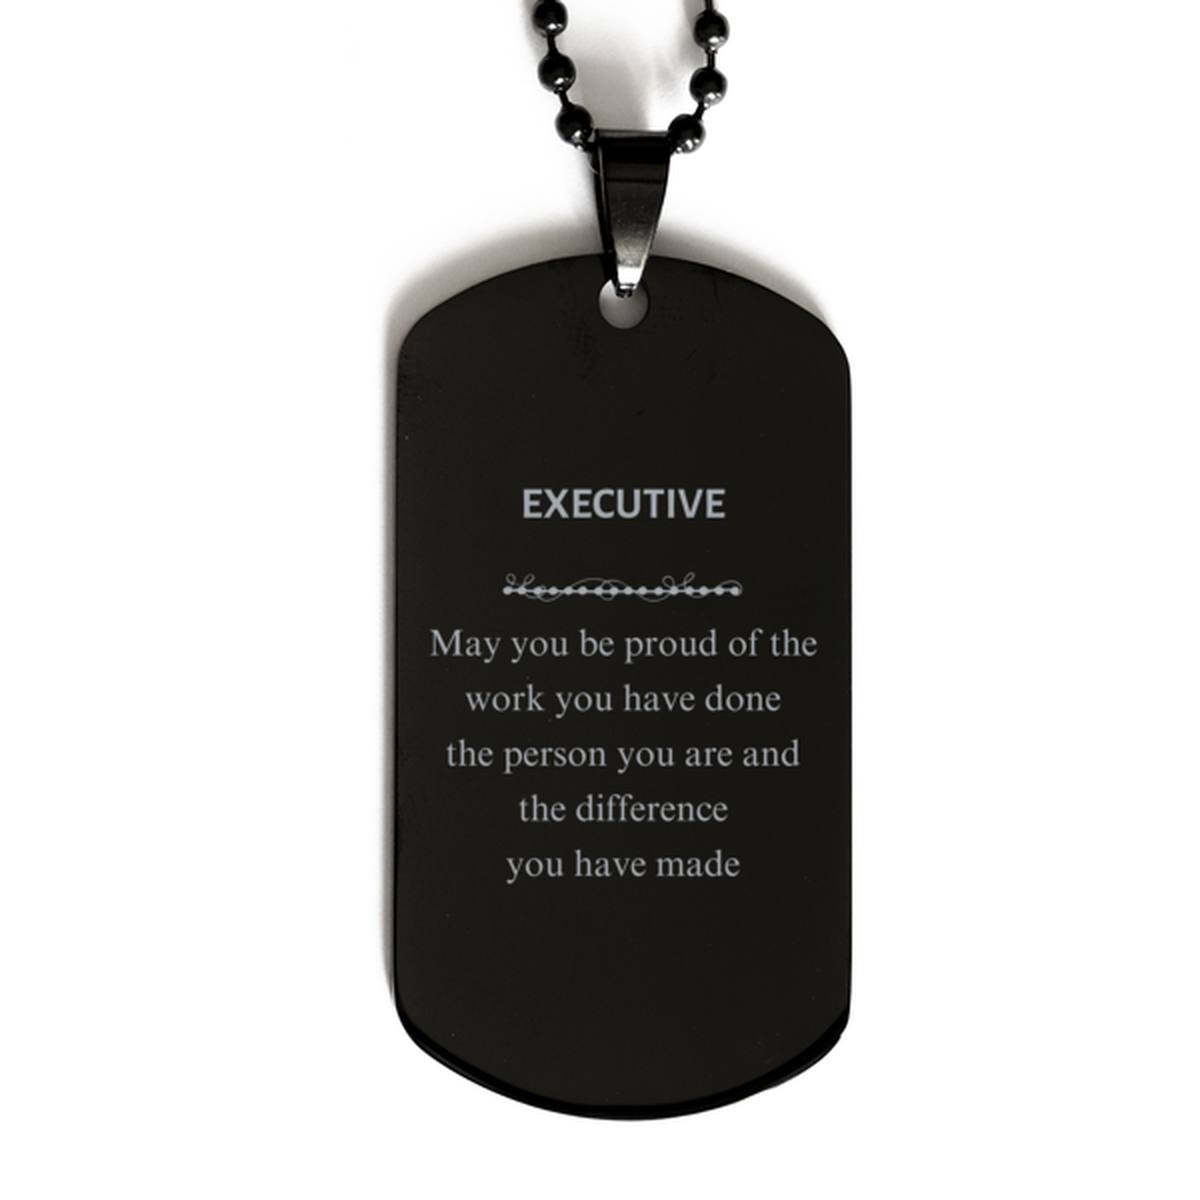 Executive May you be proud of the work you have done, Retirement Executive Black Dog Tag for Colleague Appreciation Gifts Amazing for Executive